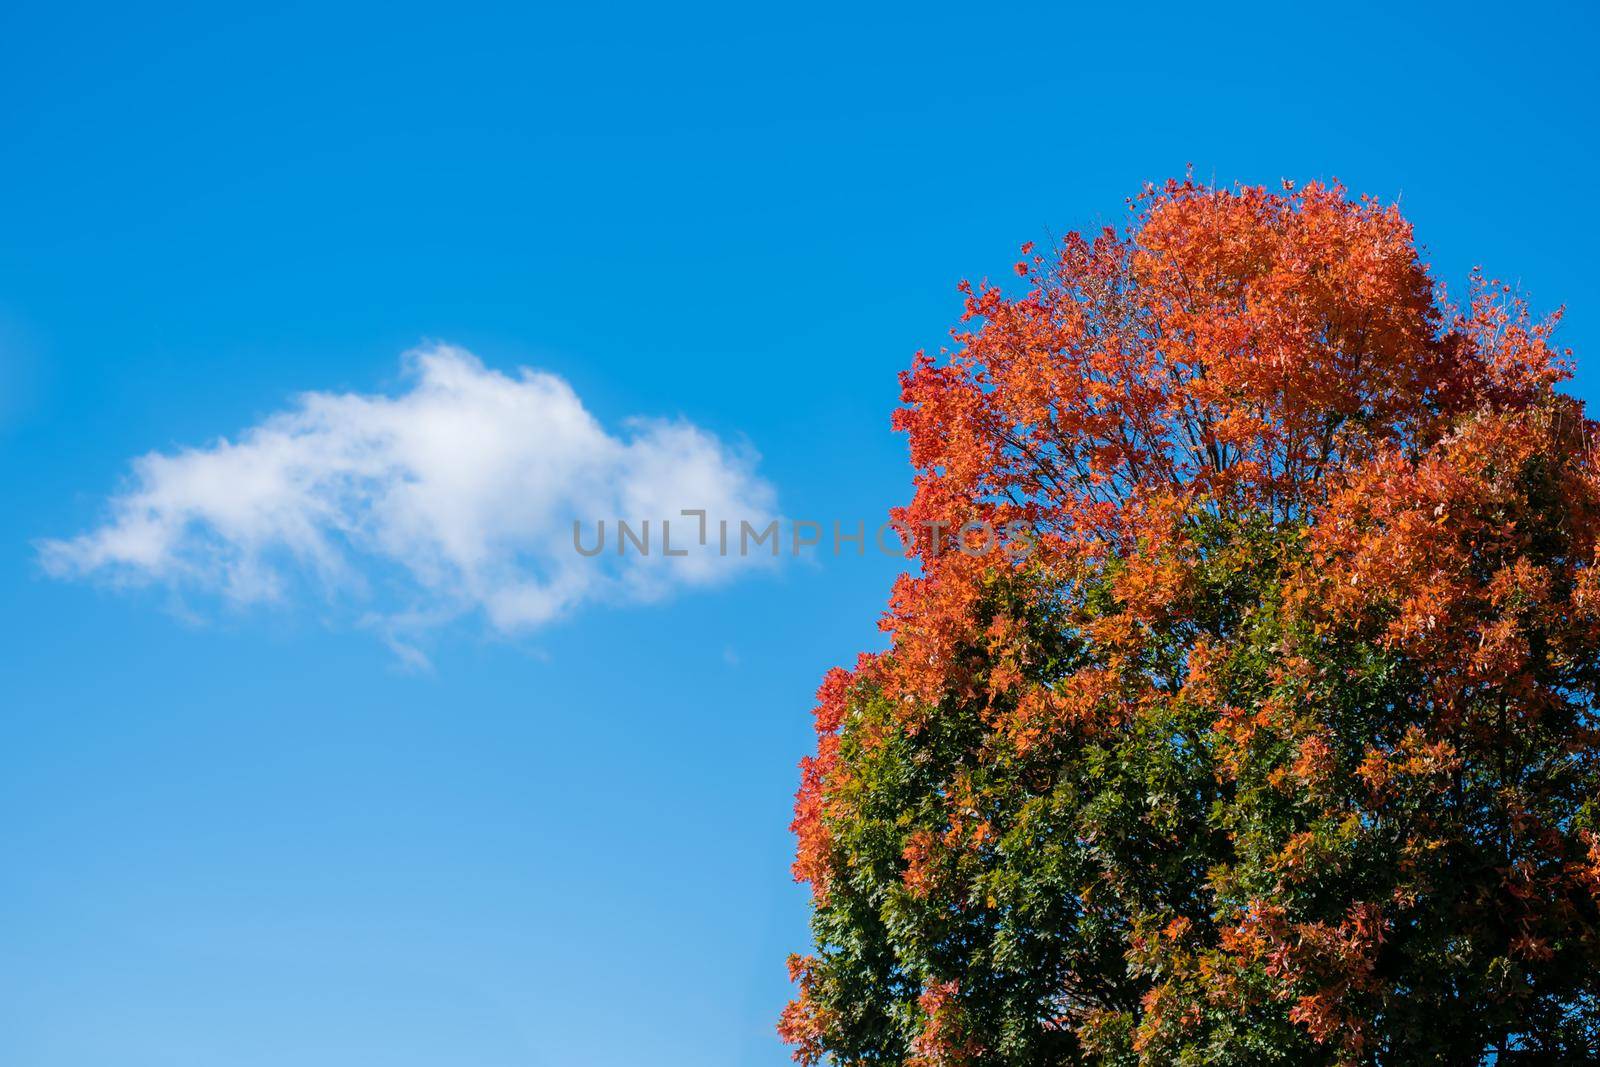 Colorful autumn tree with vibrant orange leaves against a blue sky by jyurinko